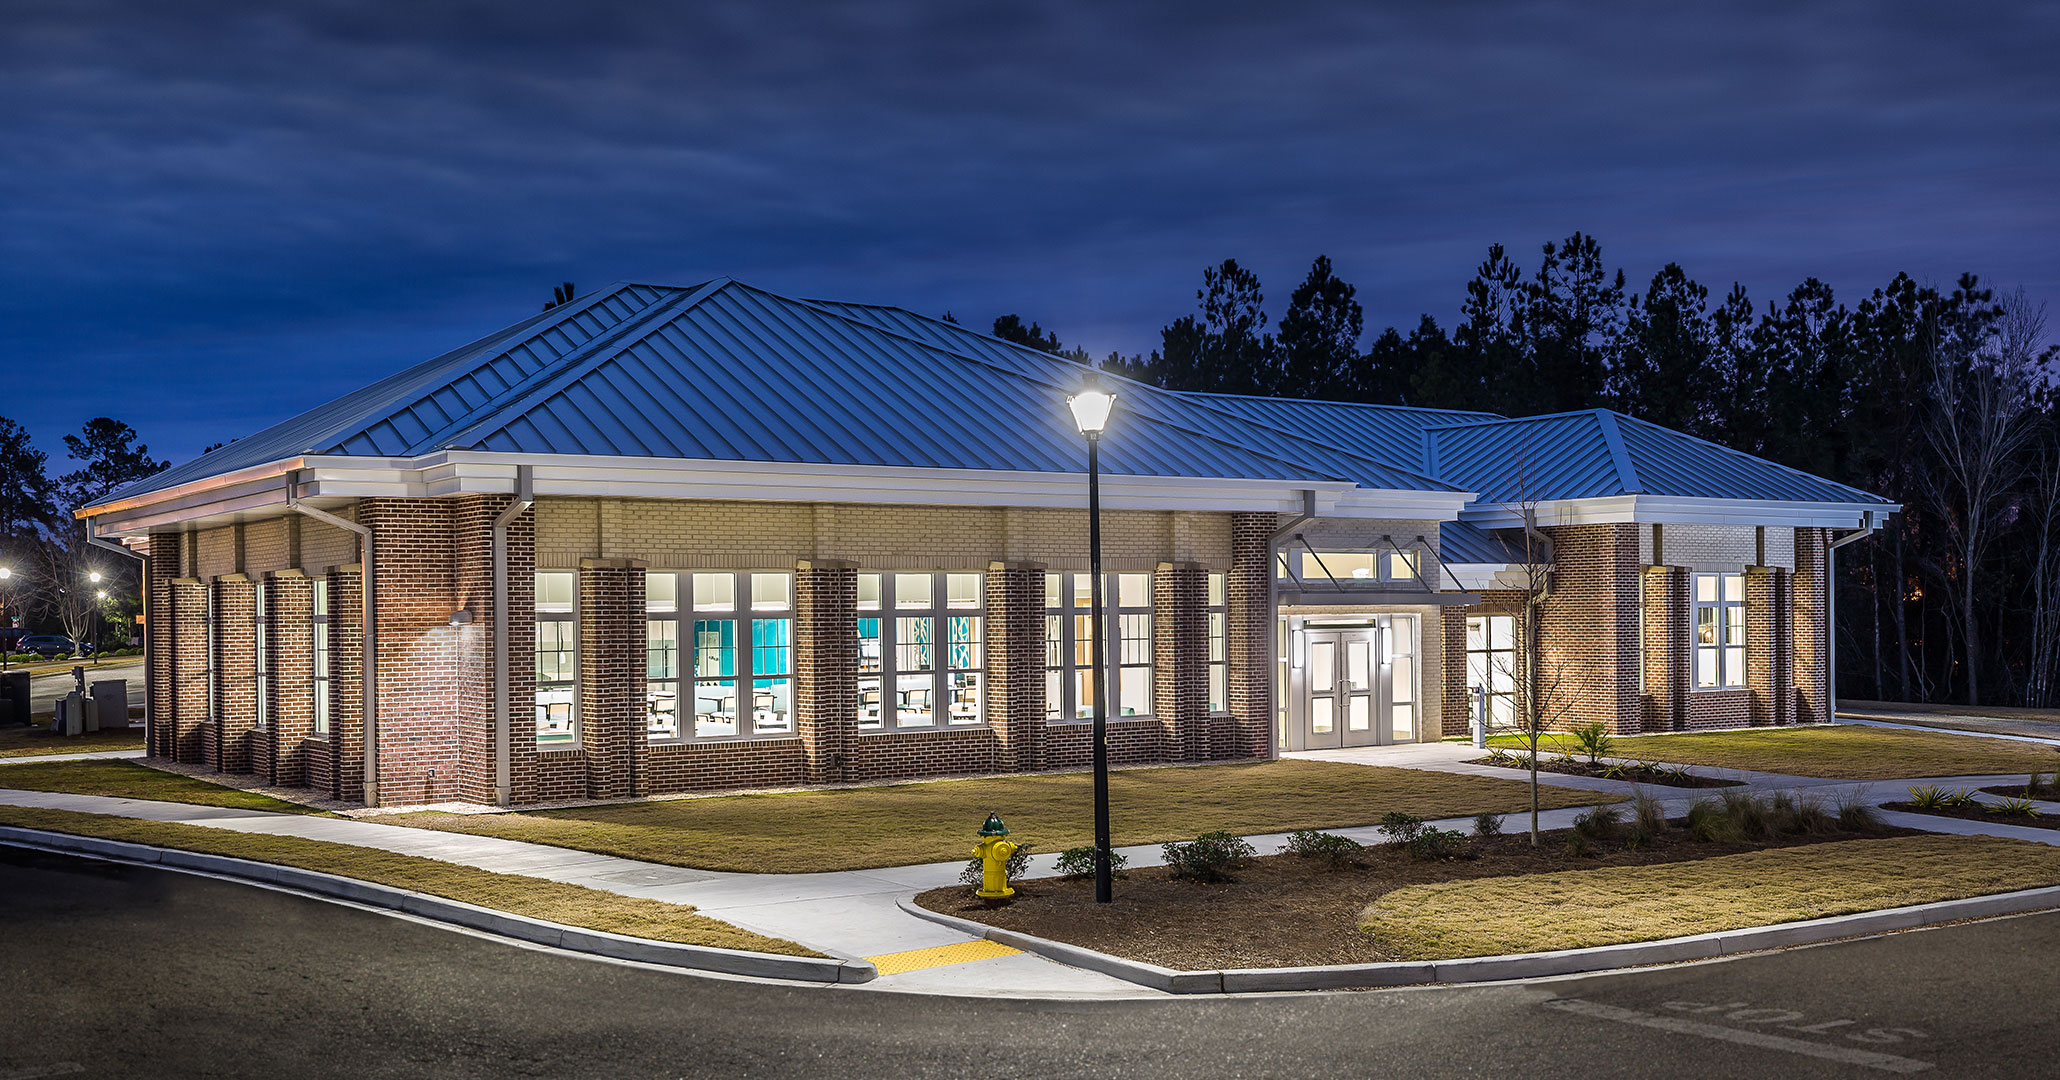 Coastal Carolina University hired Boudreaux architects to design a new building for student dining services.